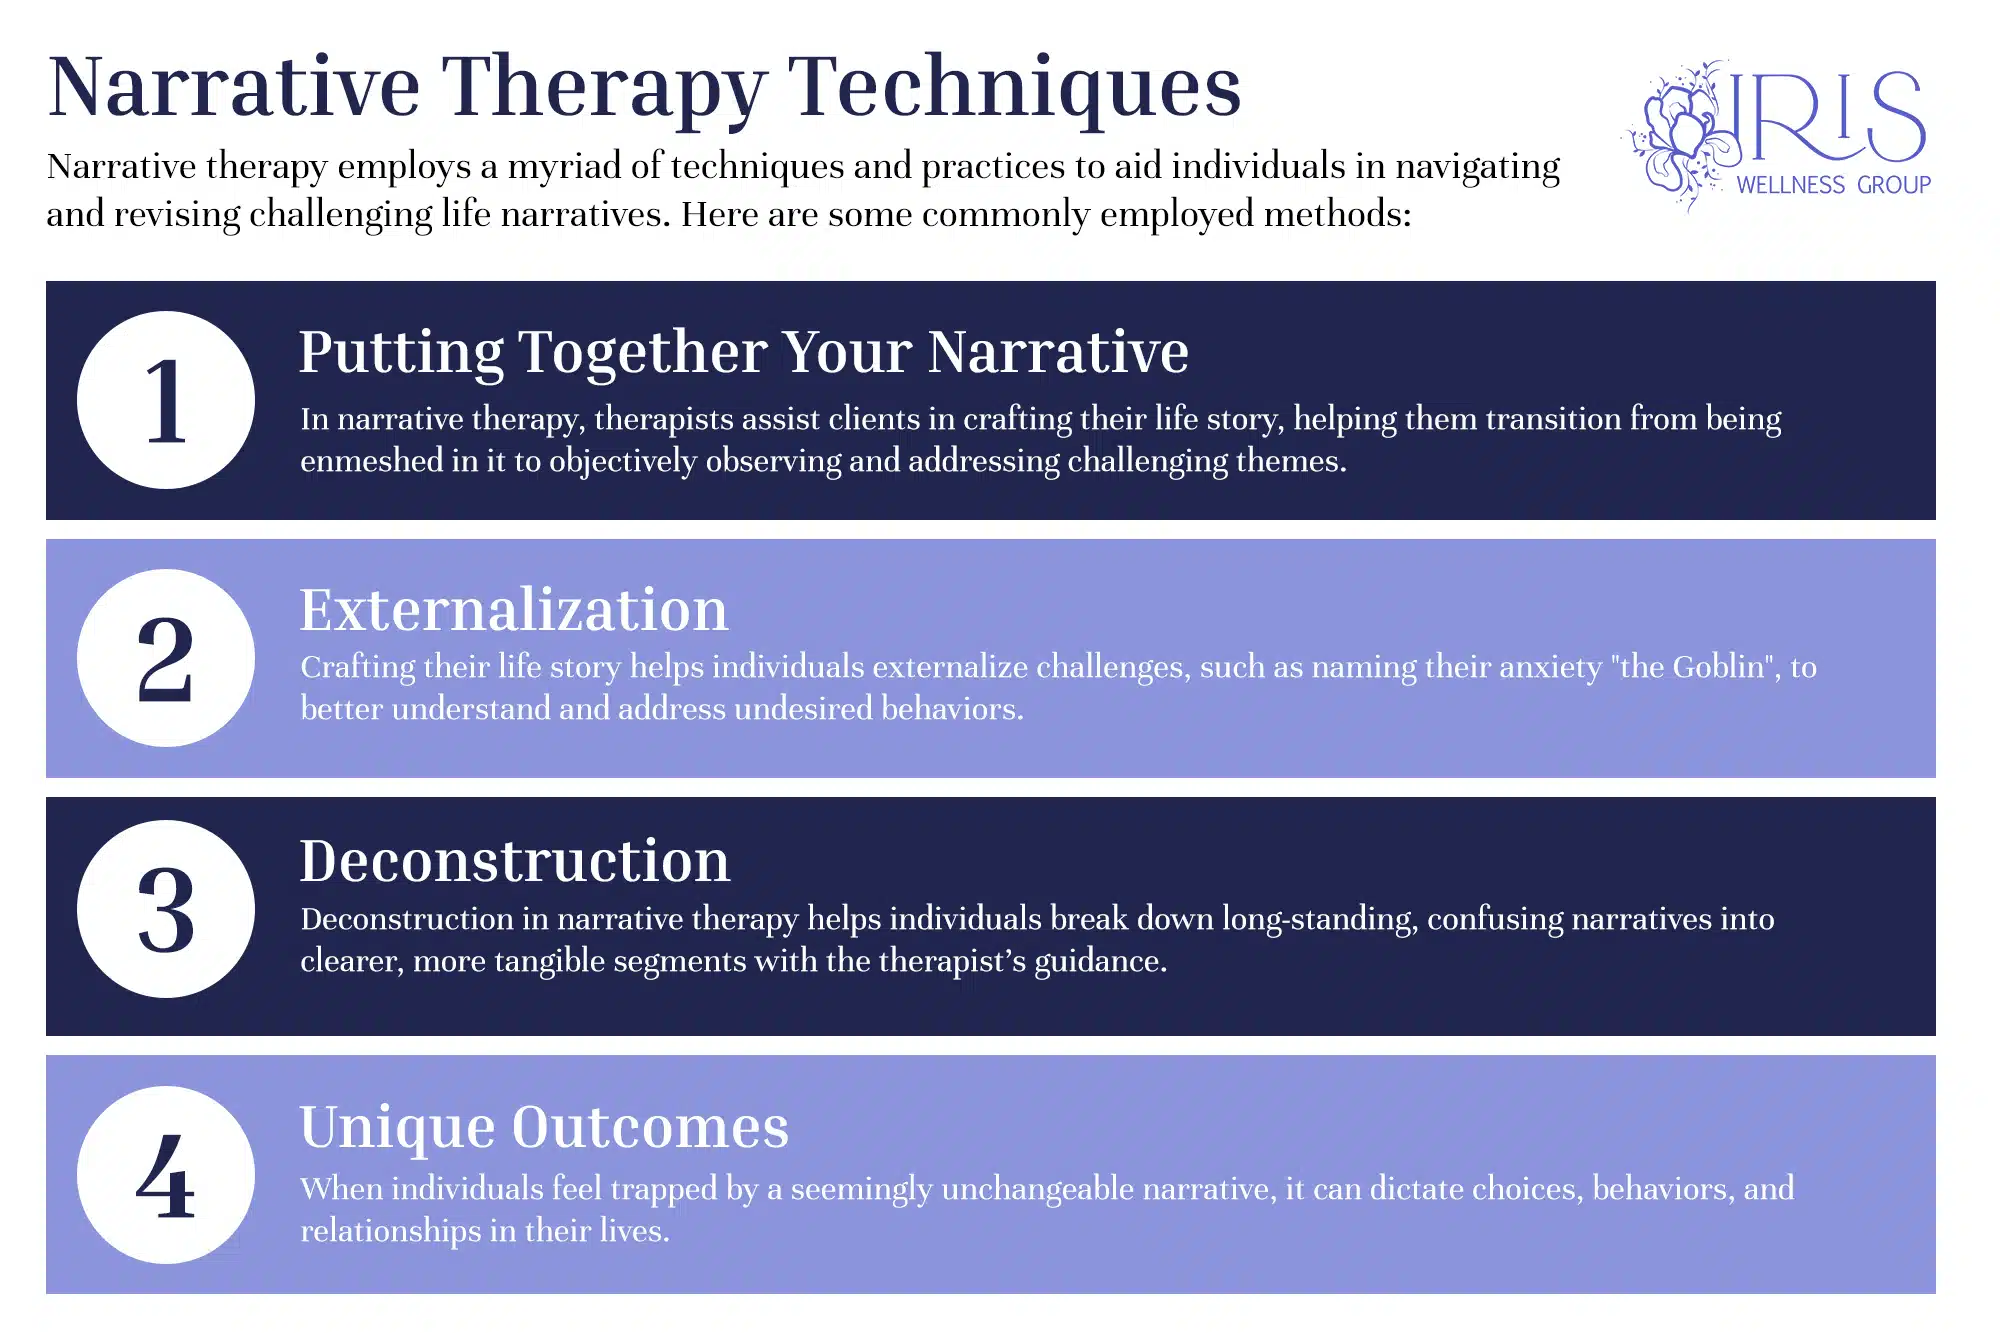 Narrative Therapy Techniques in Chattanooga, TN